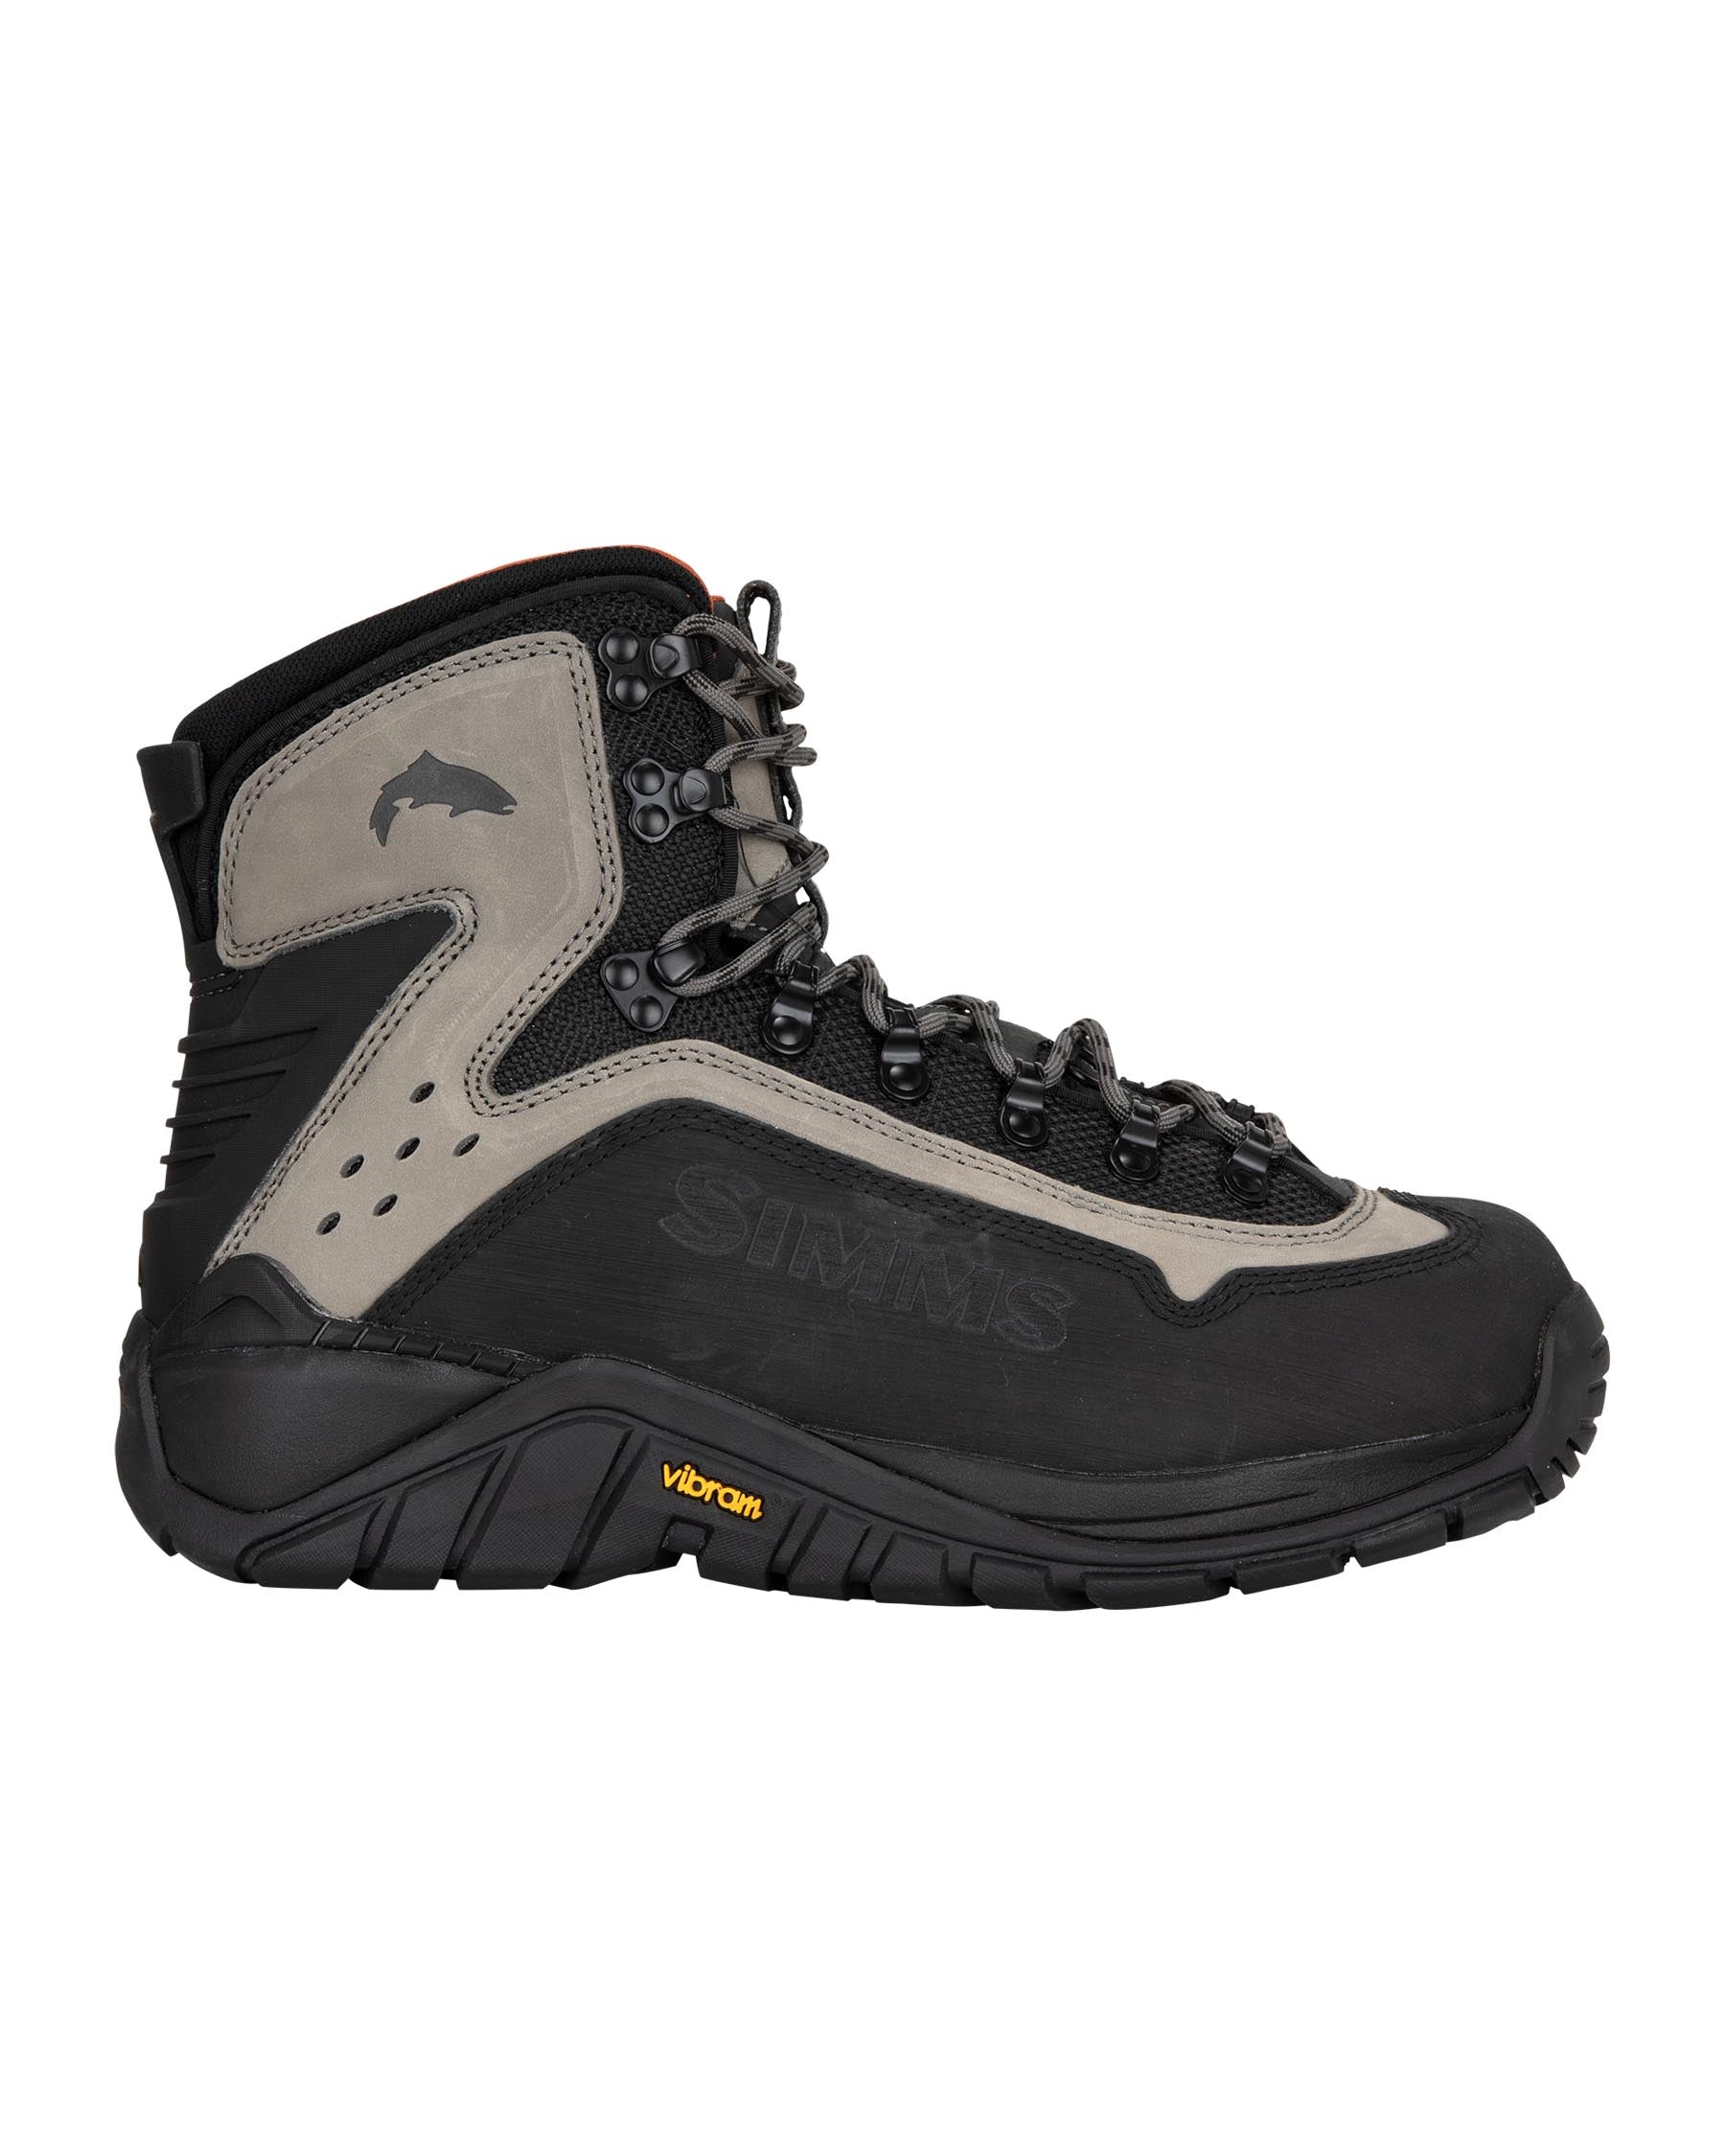 M's G3 Guide Wading Boots - Vibram Sole | Simms Fishing Products